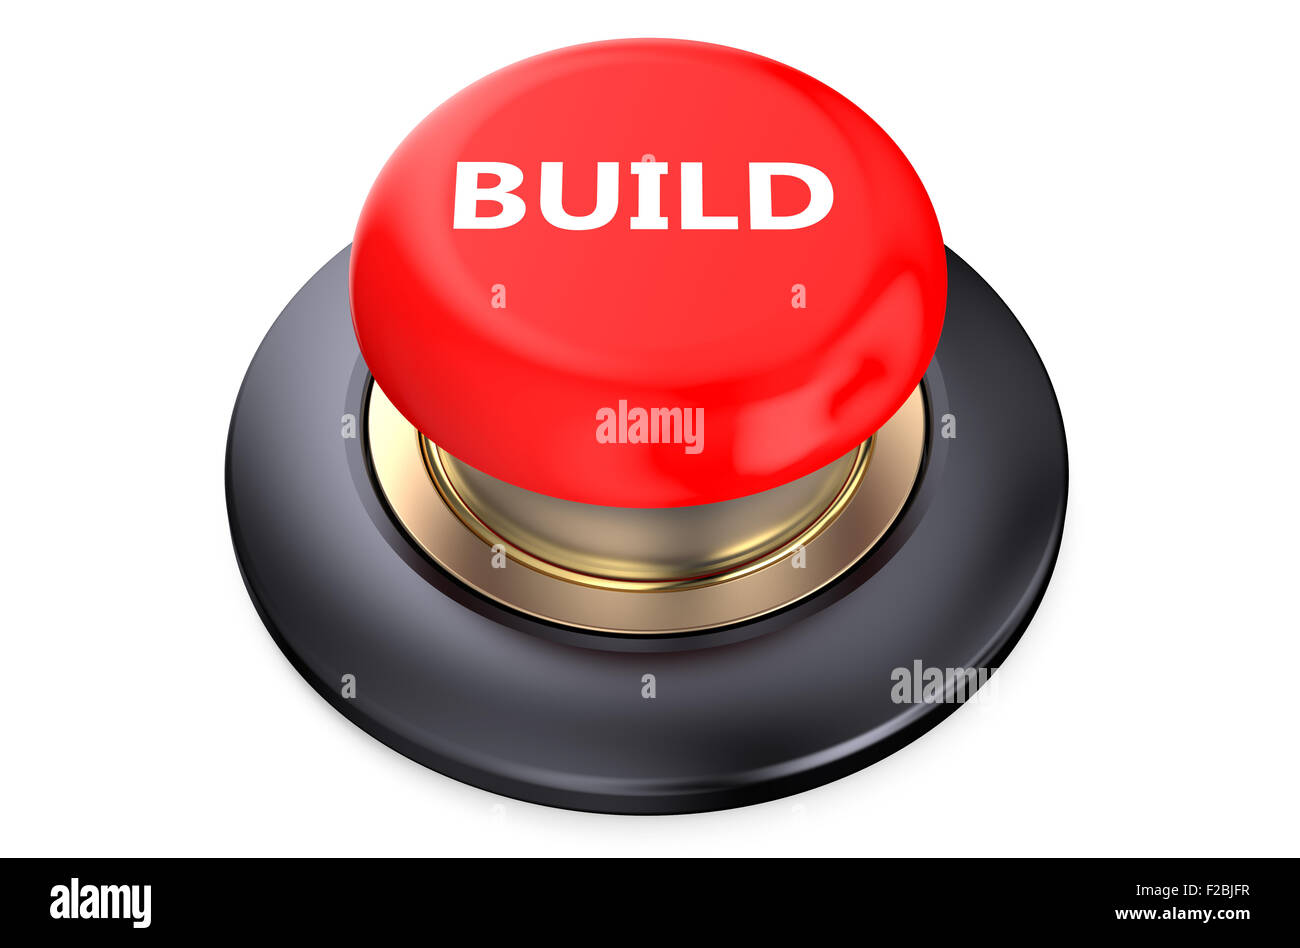 Build concept on red pushbutton Stock Photo